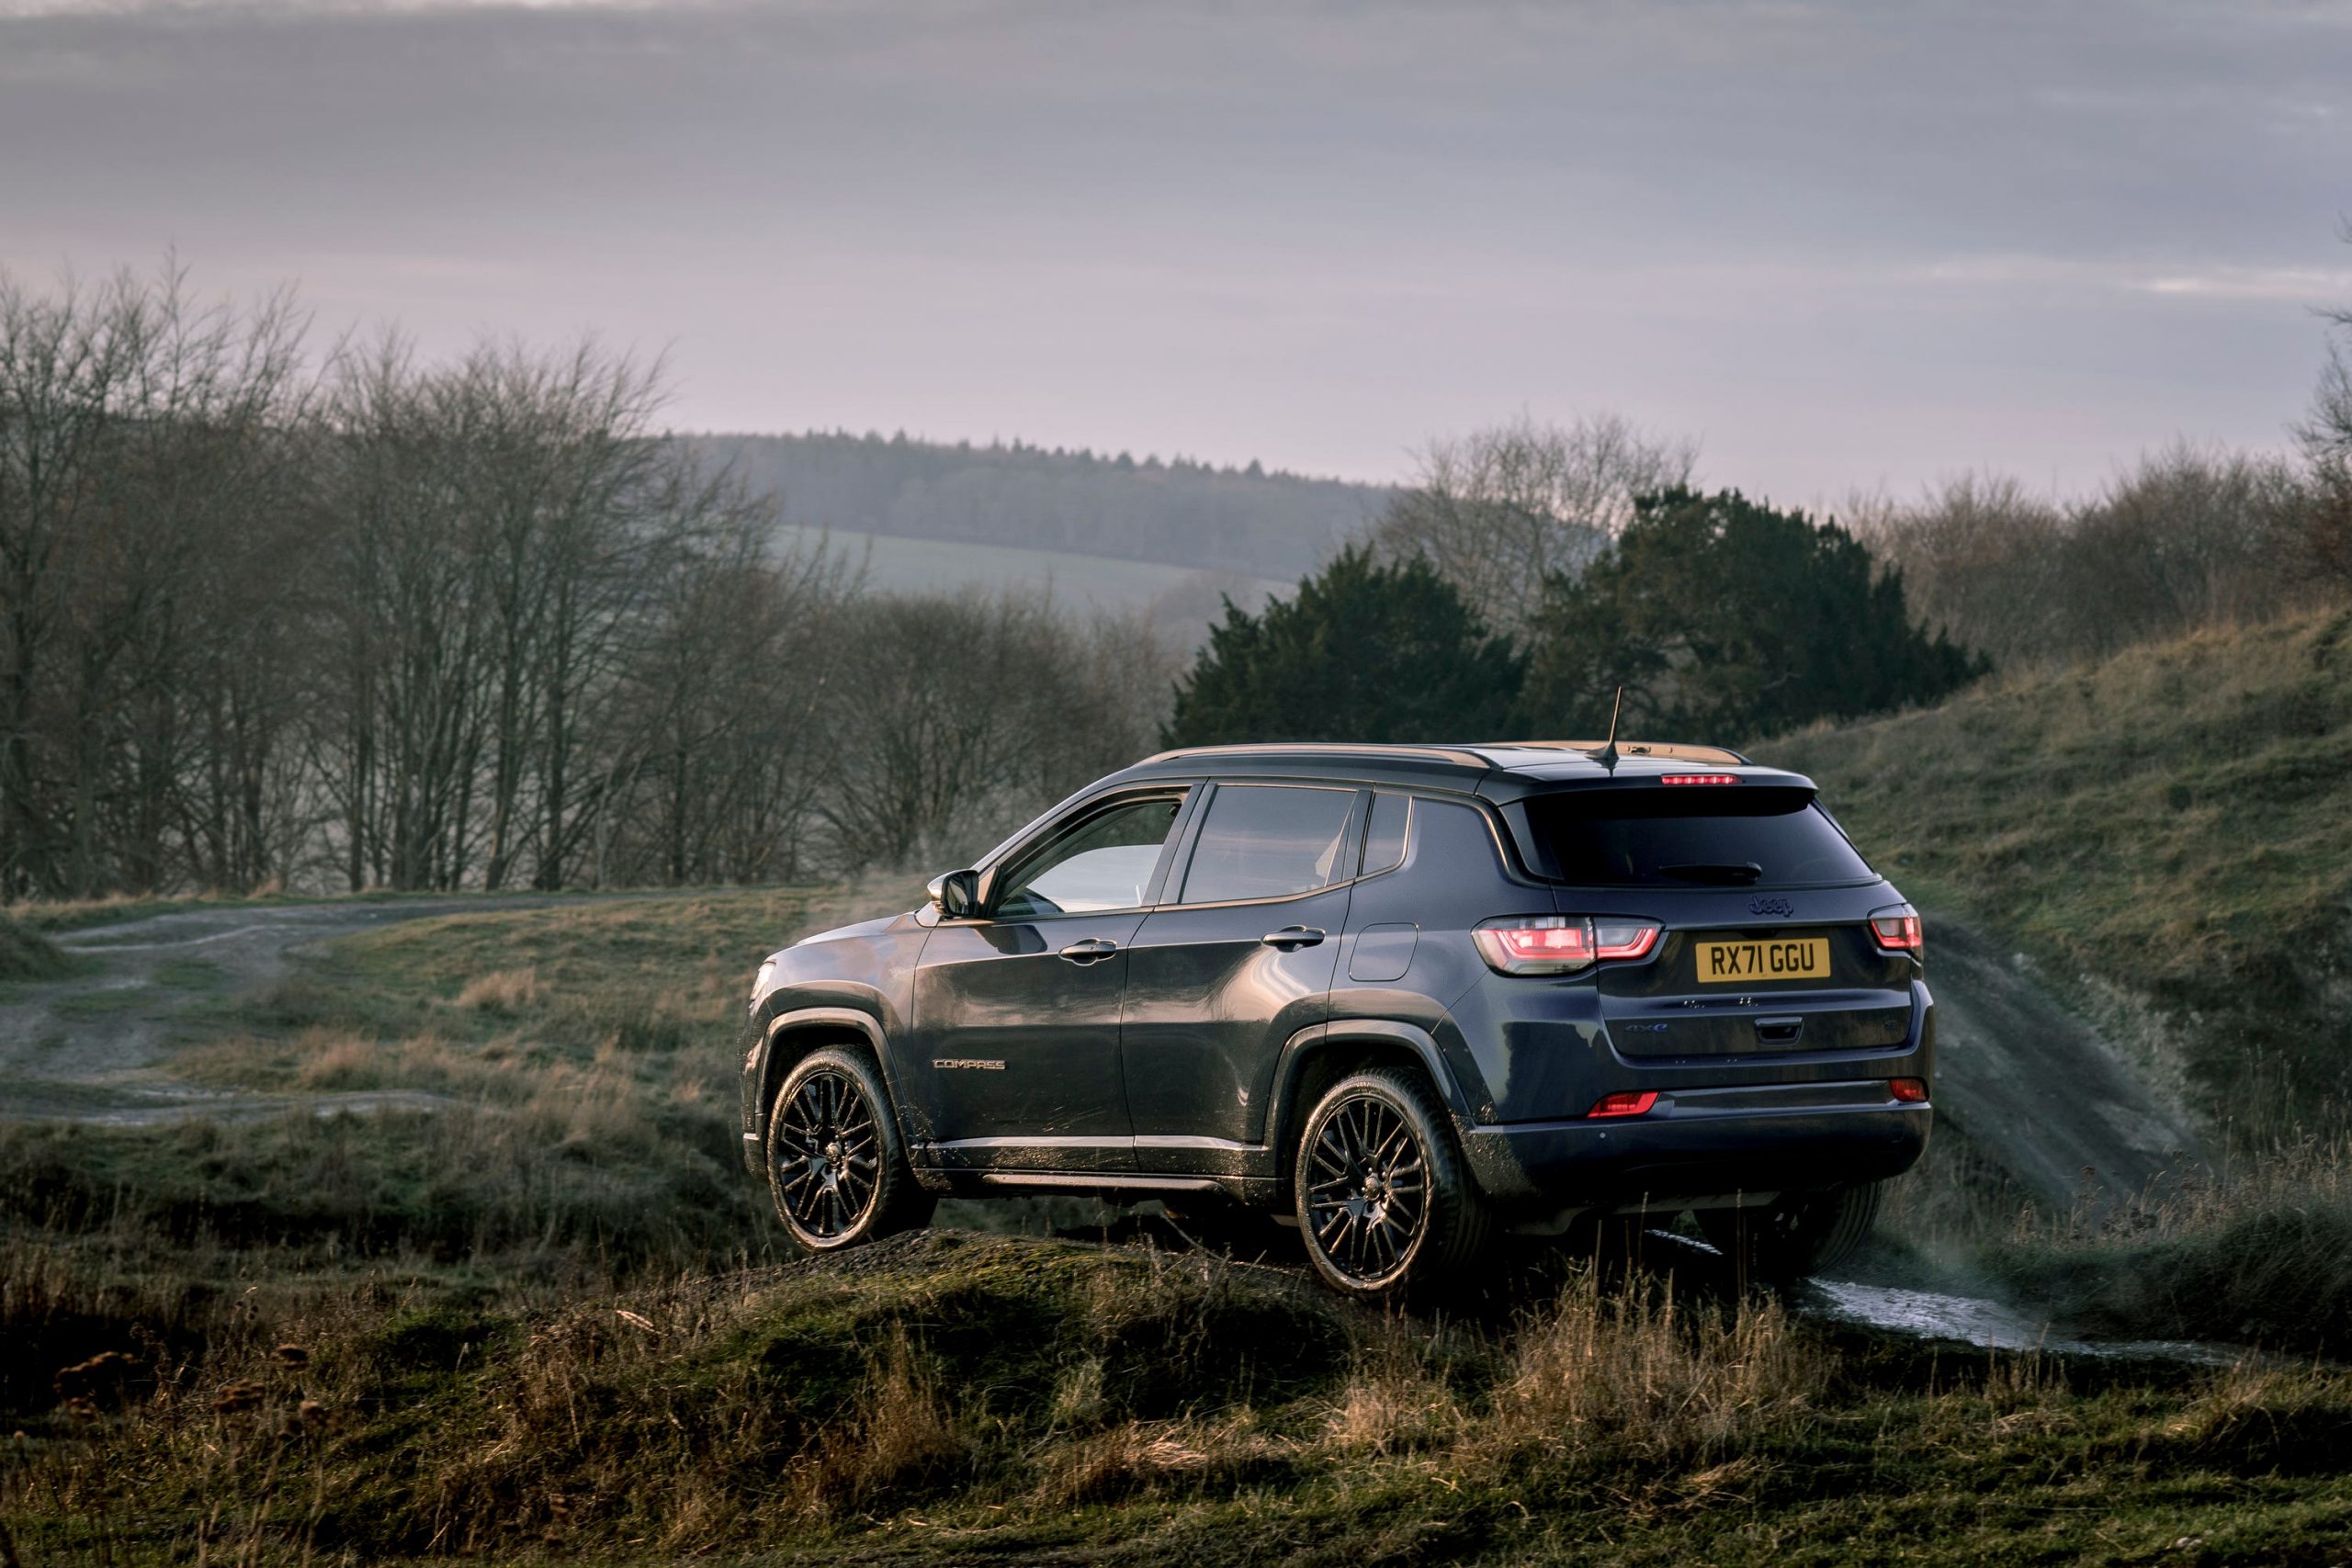 Jeep Compass on an off-road course